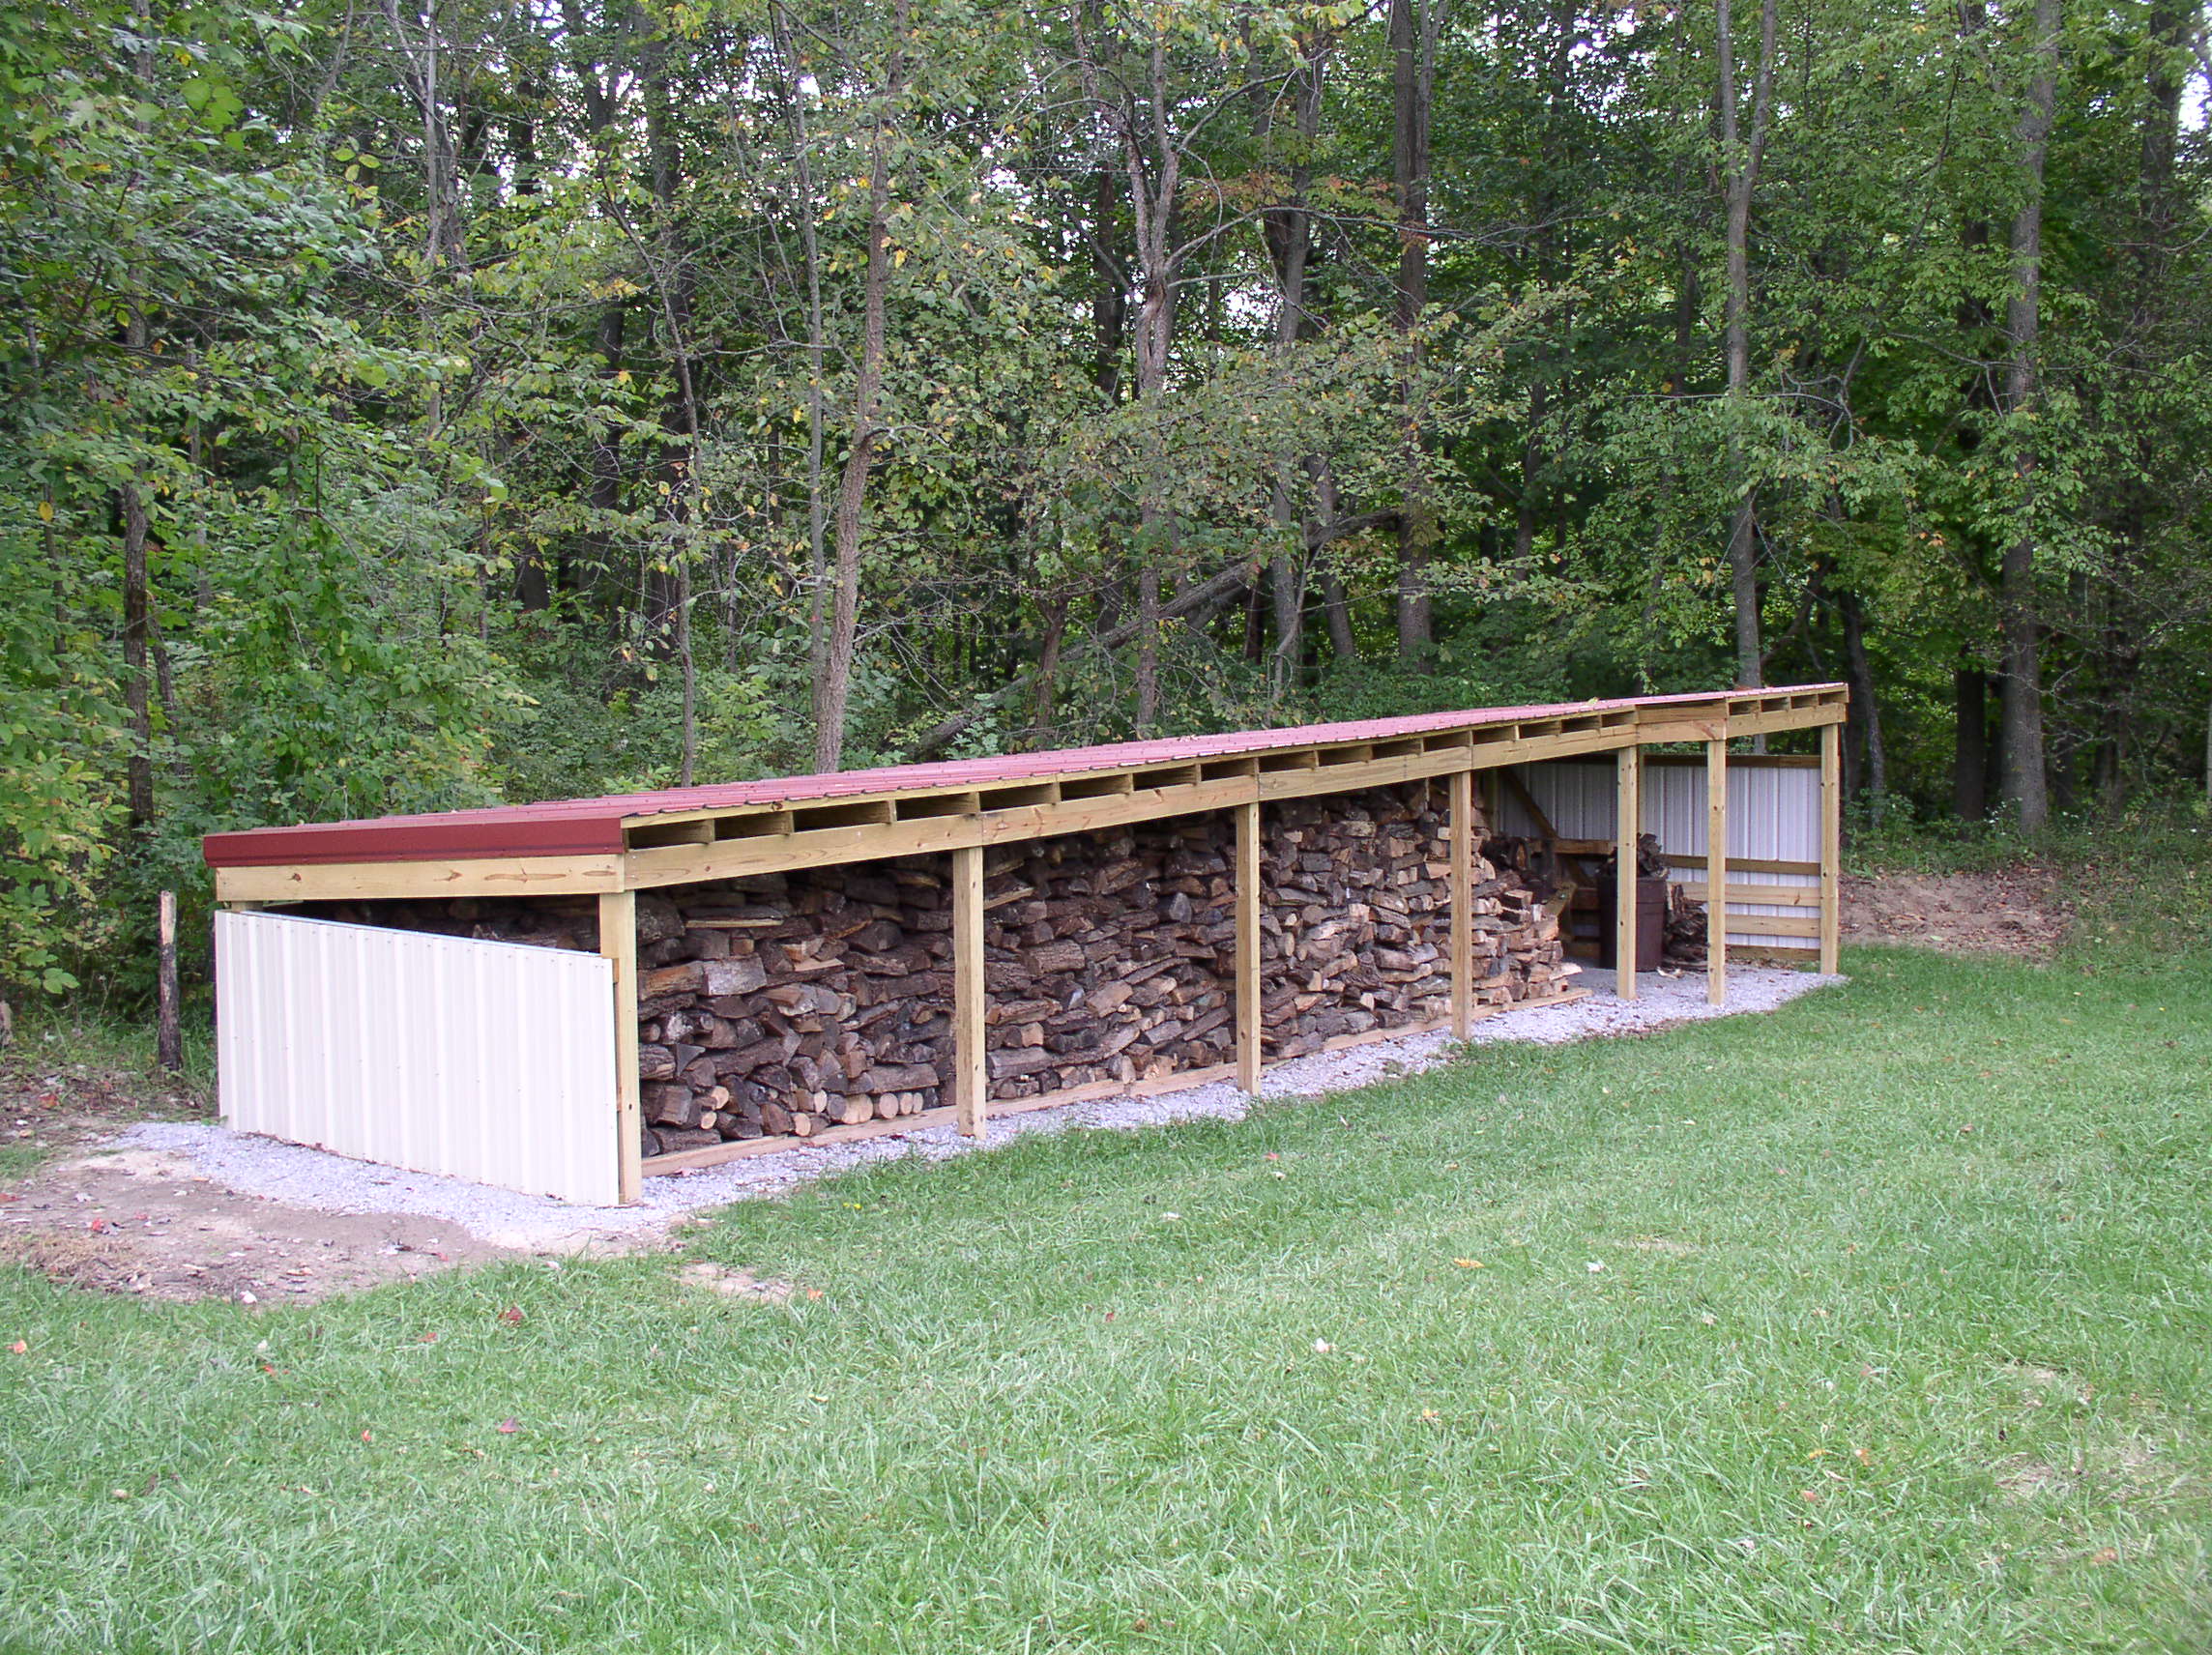 How To Buy Replacement Wood Shed Doors For Your Back Yard Storage Shed 